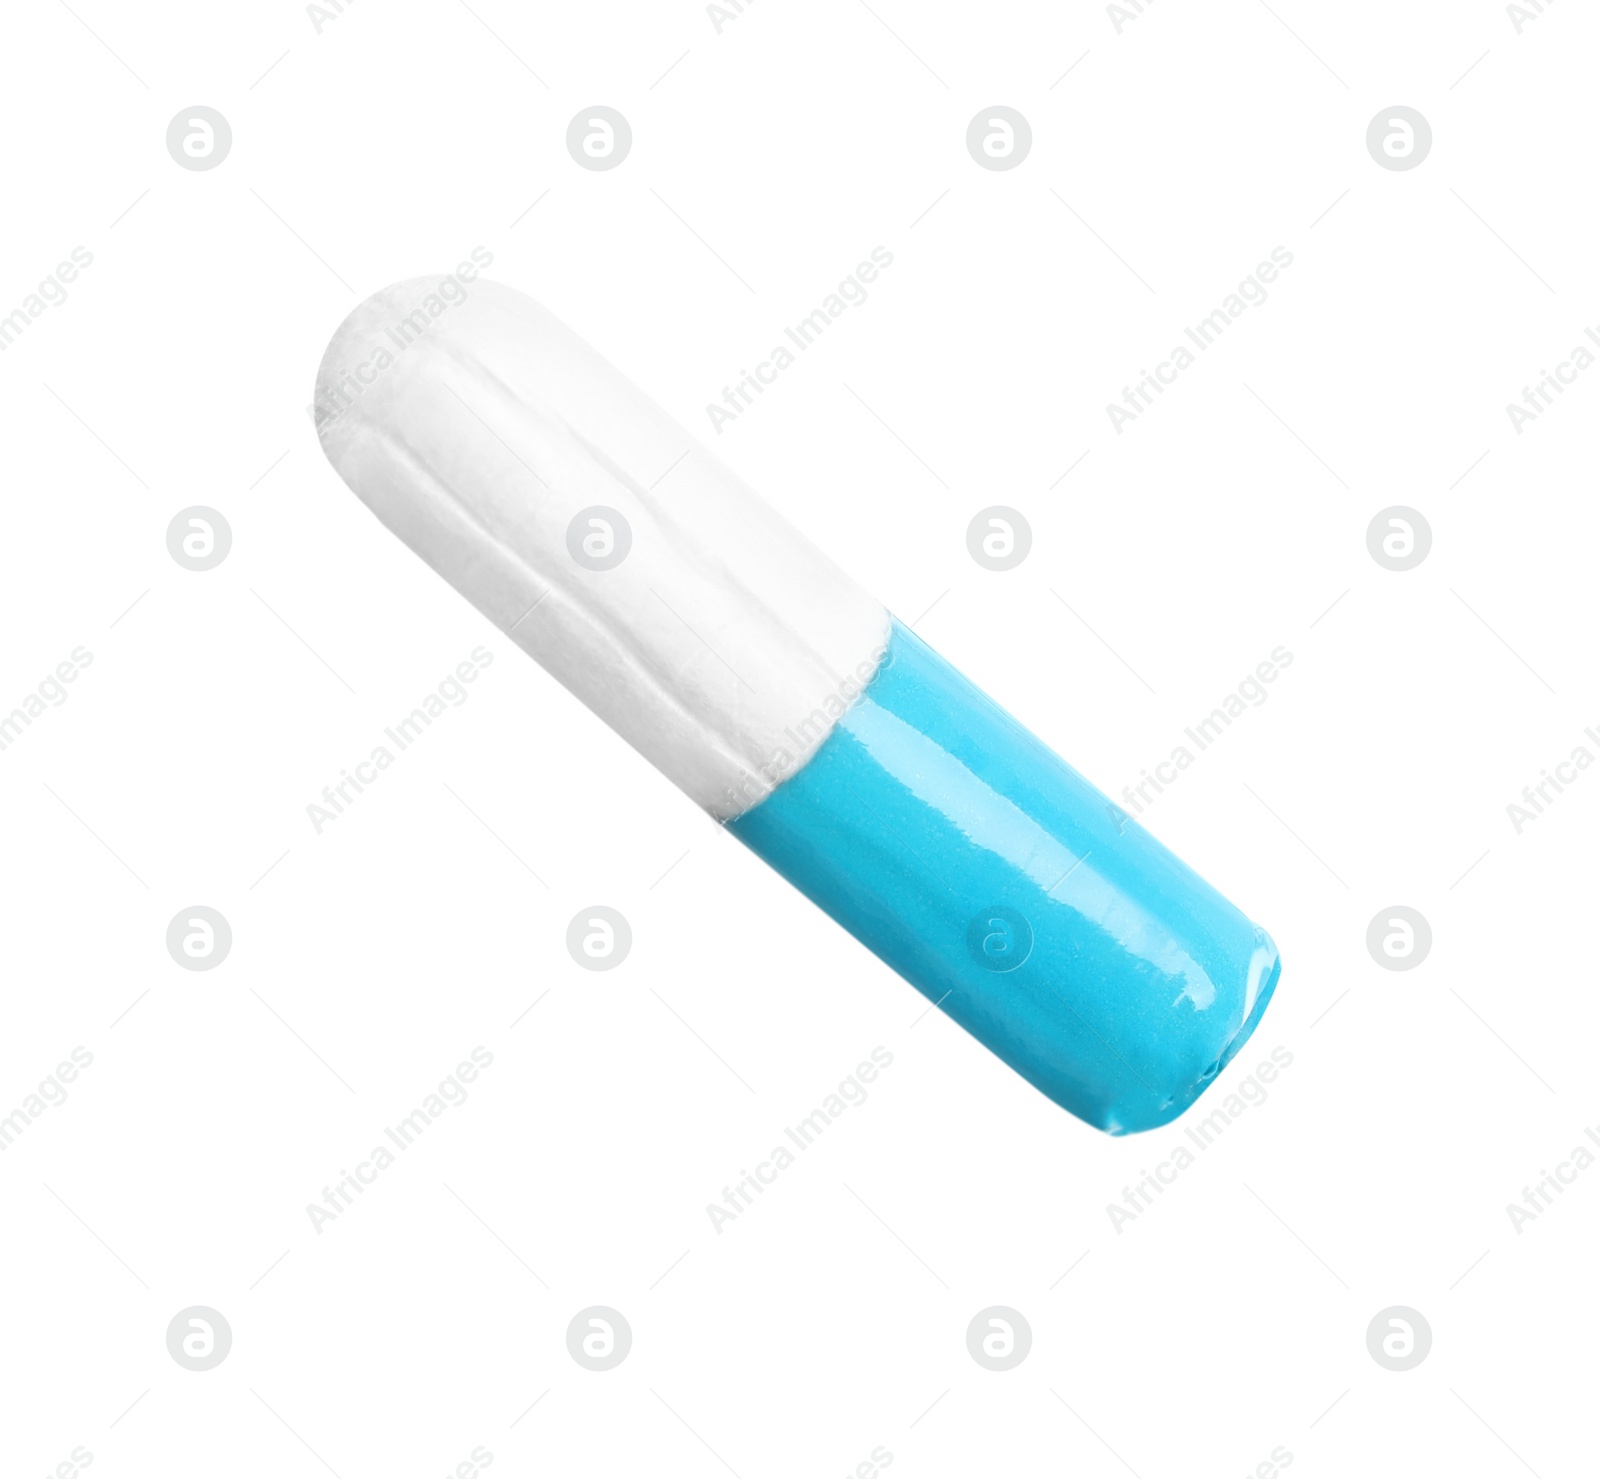 Photo of Tampon with turquoise package isolated on white